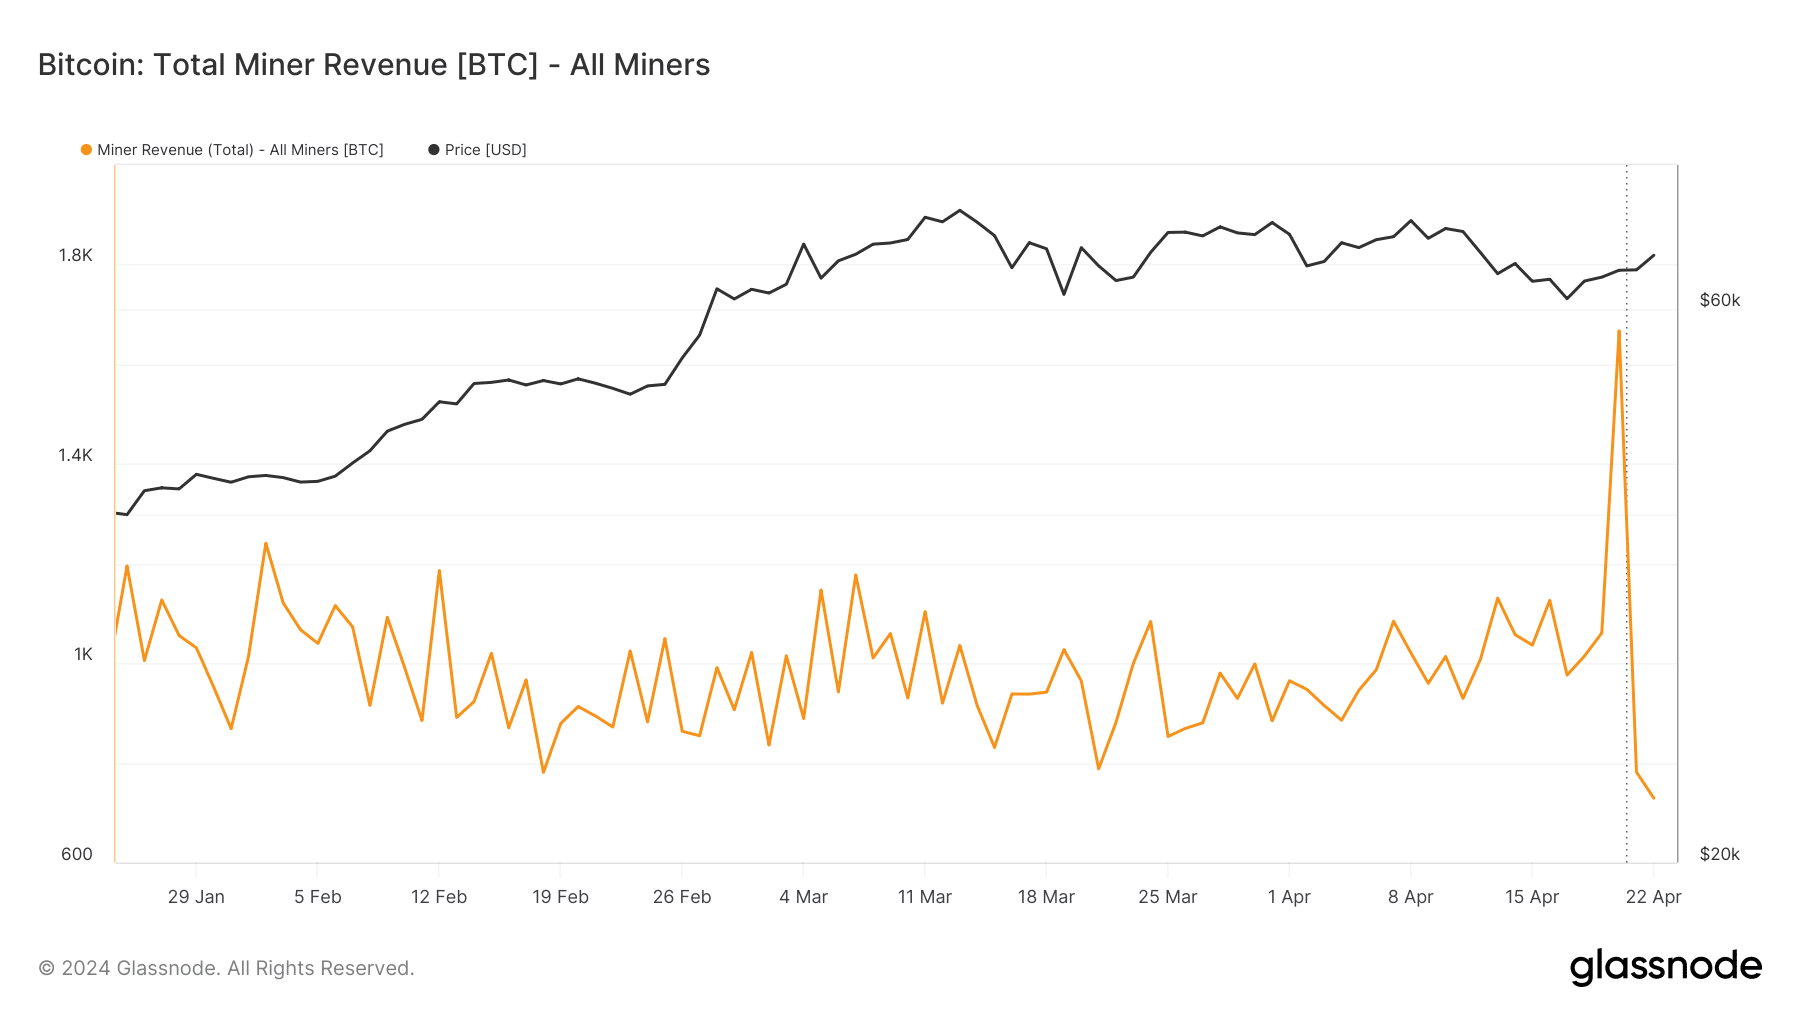 Bitcoin revenues drop after the halving